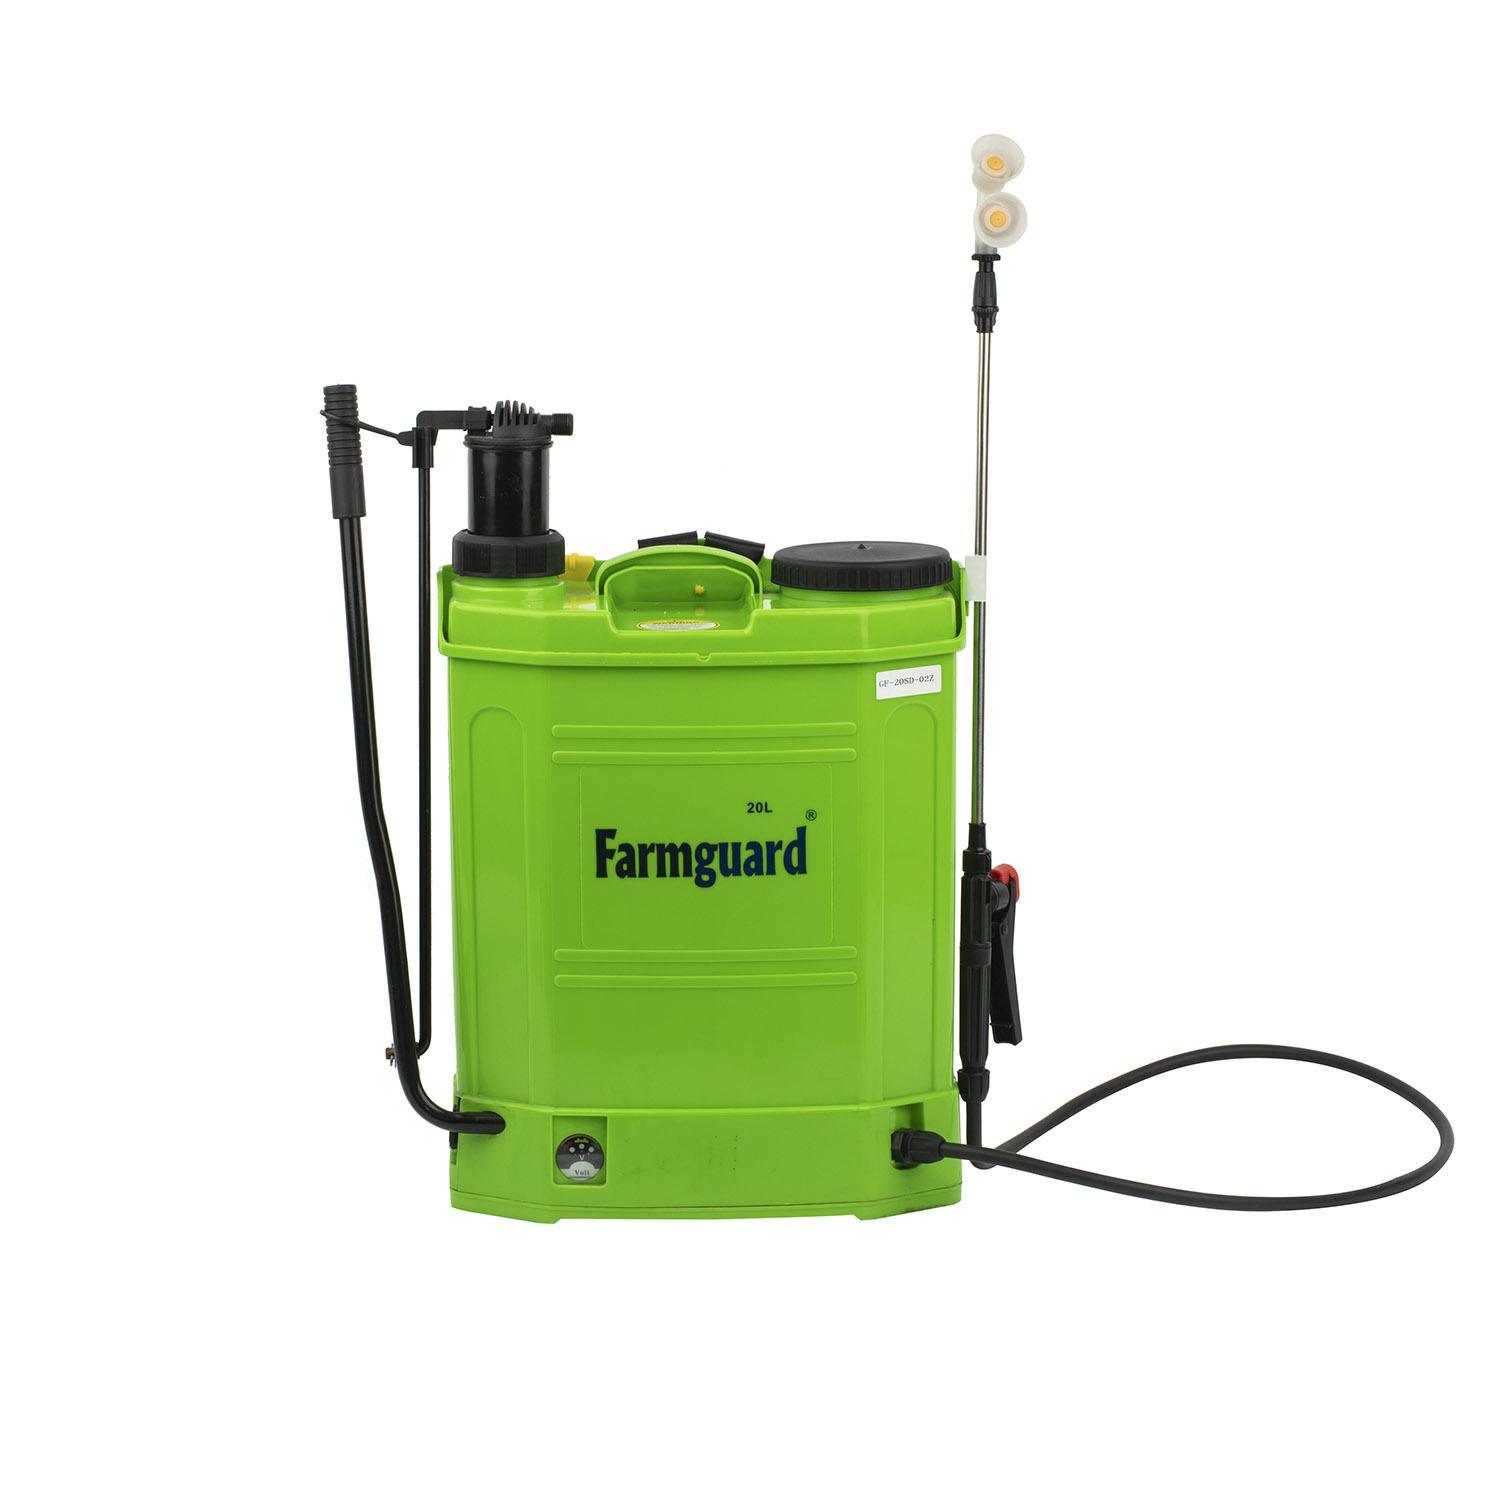 How to disinfect agricultural knapsack sprayers？